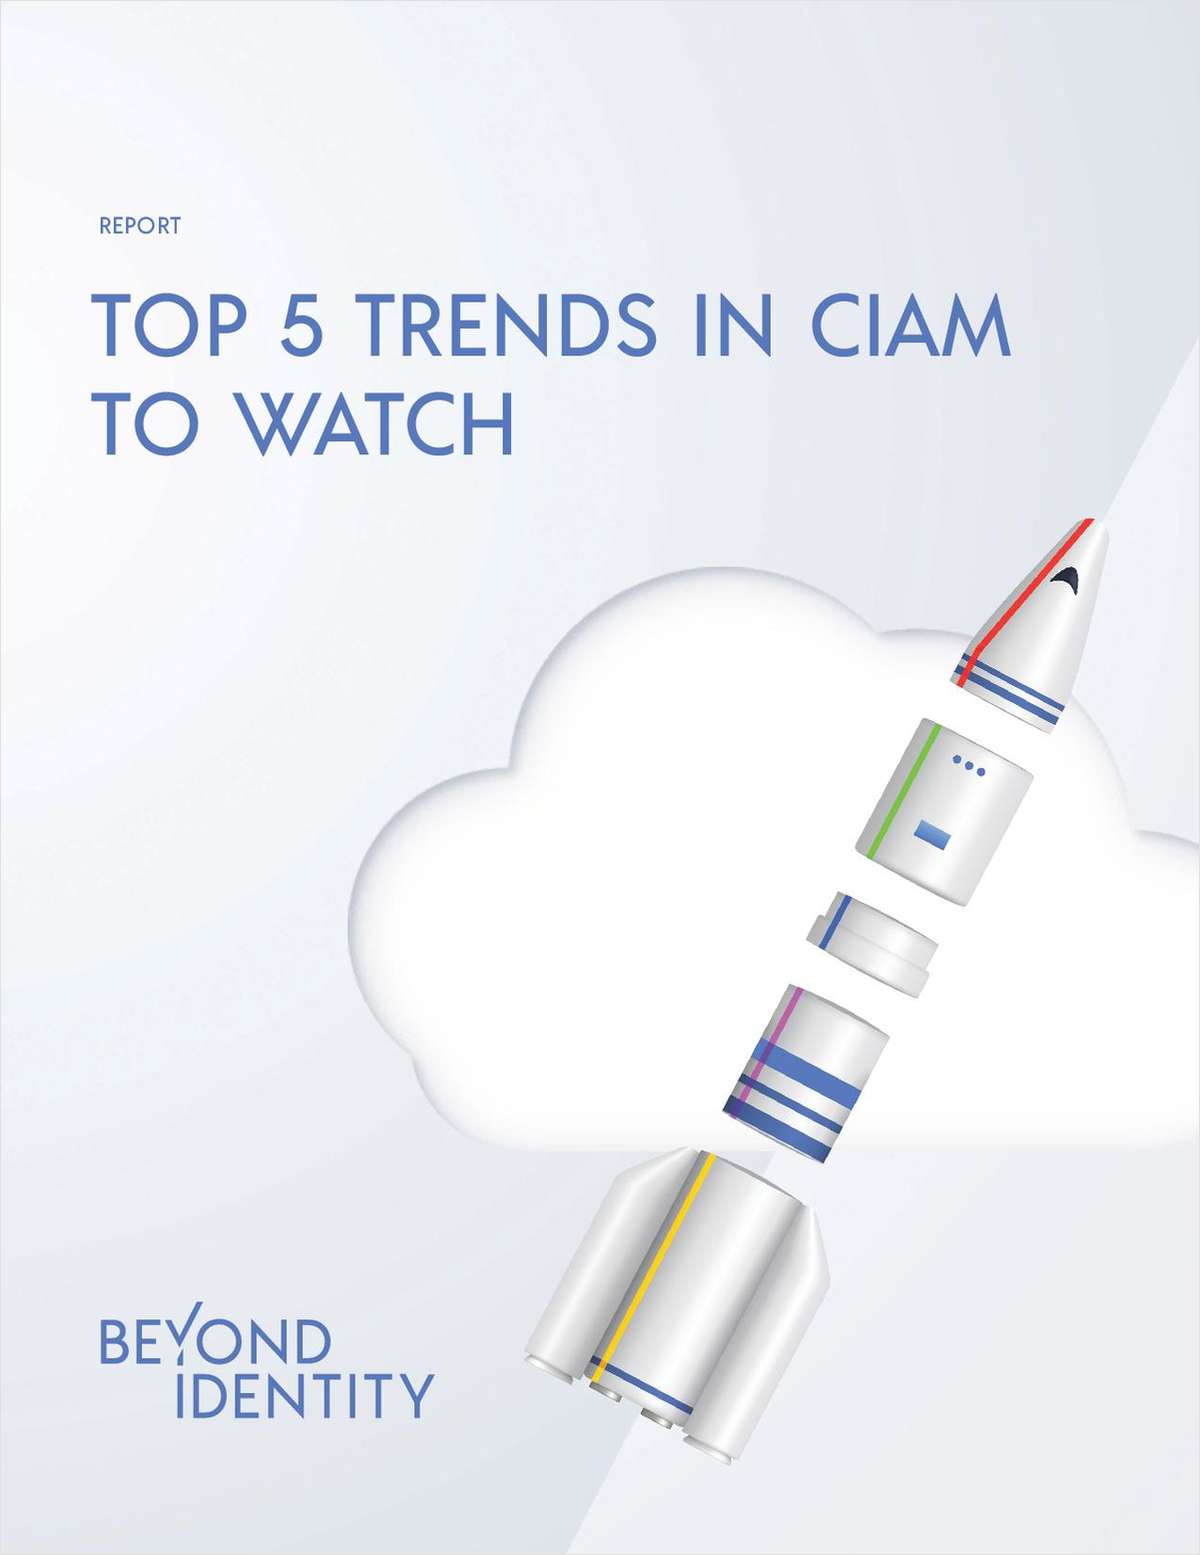 Top 5 Trends in CIAM To Watch